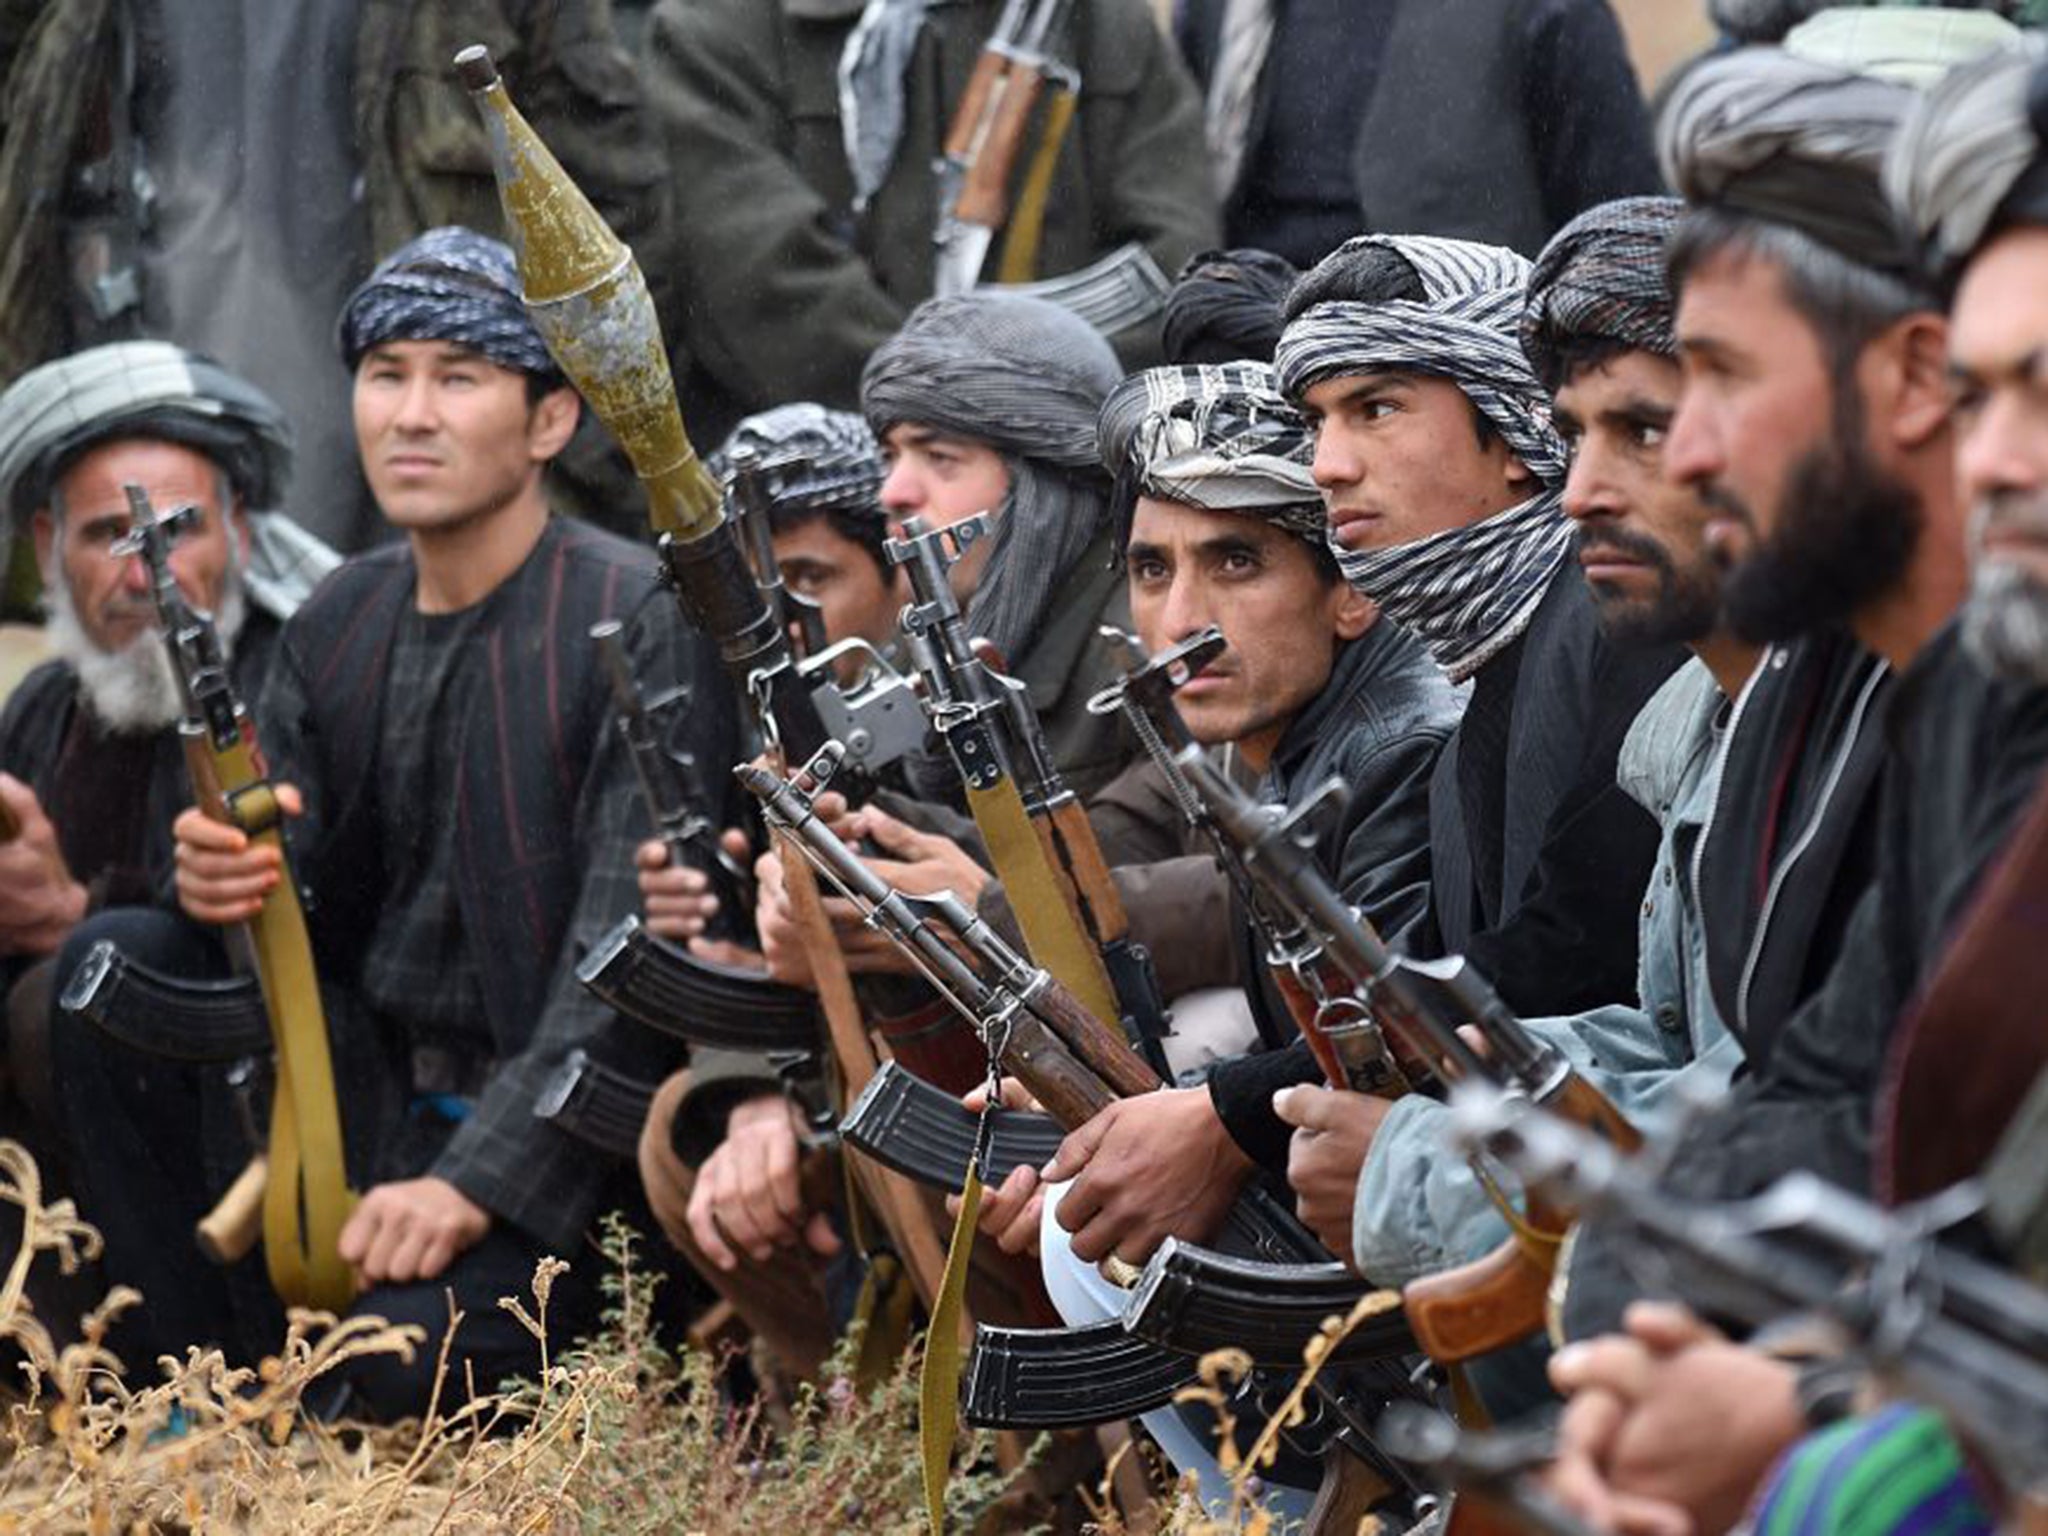 Members of an anti-Taliban militia meet to discuss tactics, but Afghan army forces are disorganised and often go unpaid